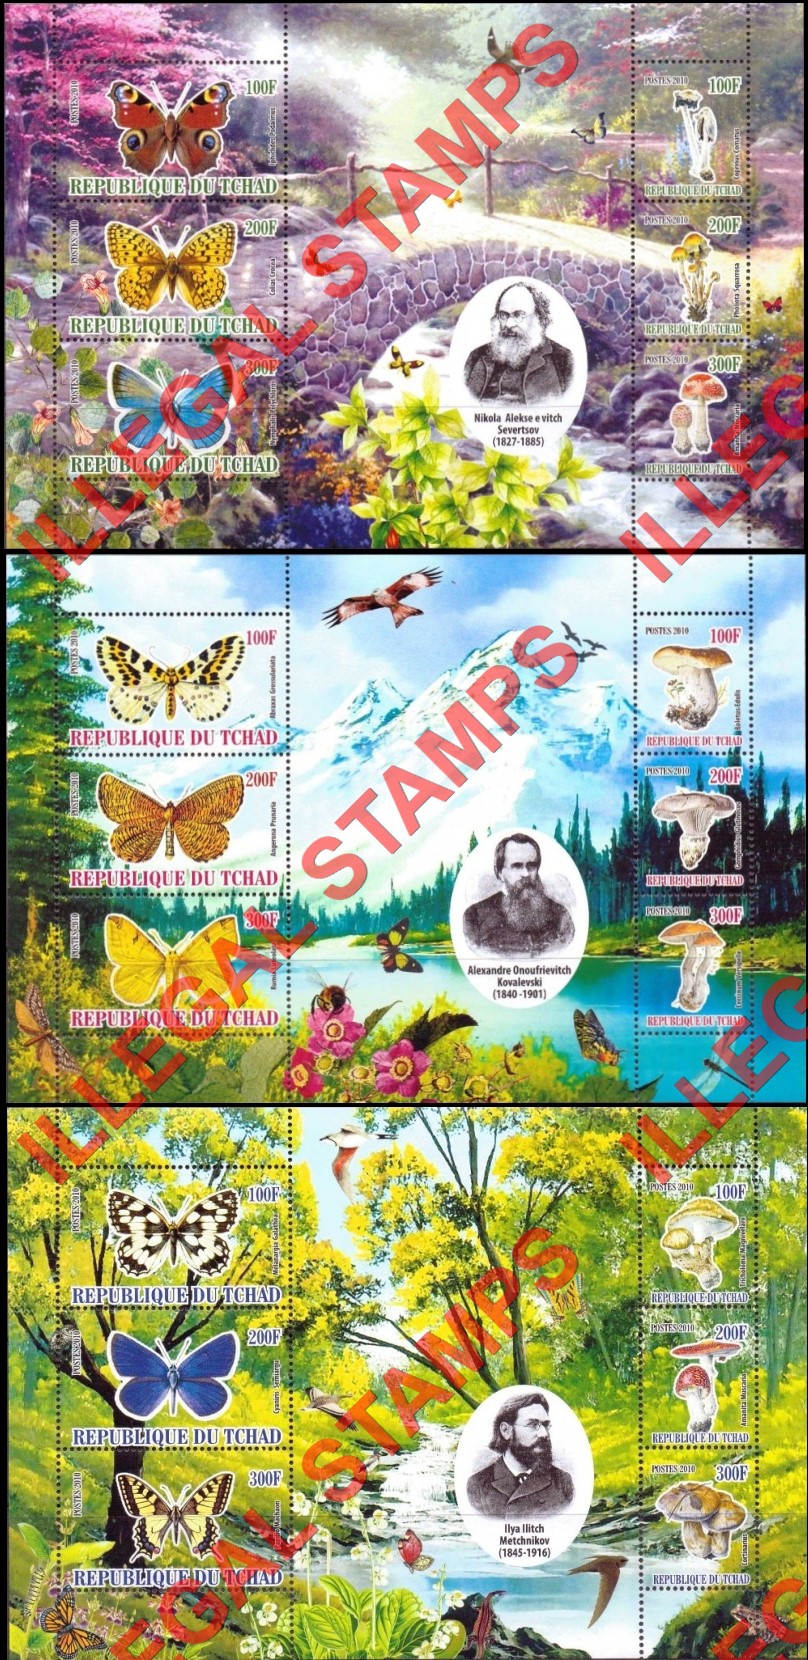 Chad 2010 Butterflies and Mushrooms Illegal Stamps in Souvenir Sheets of 6 (Part 3)